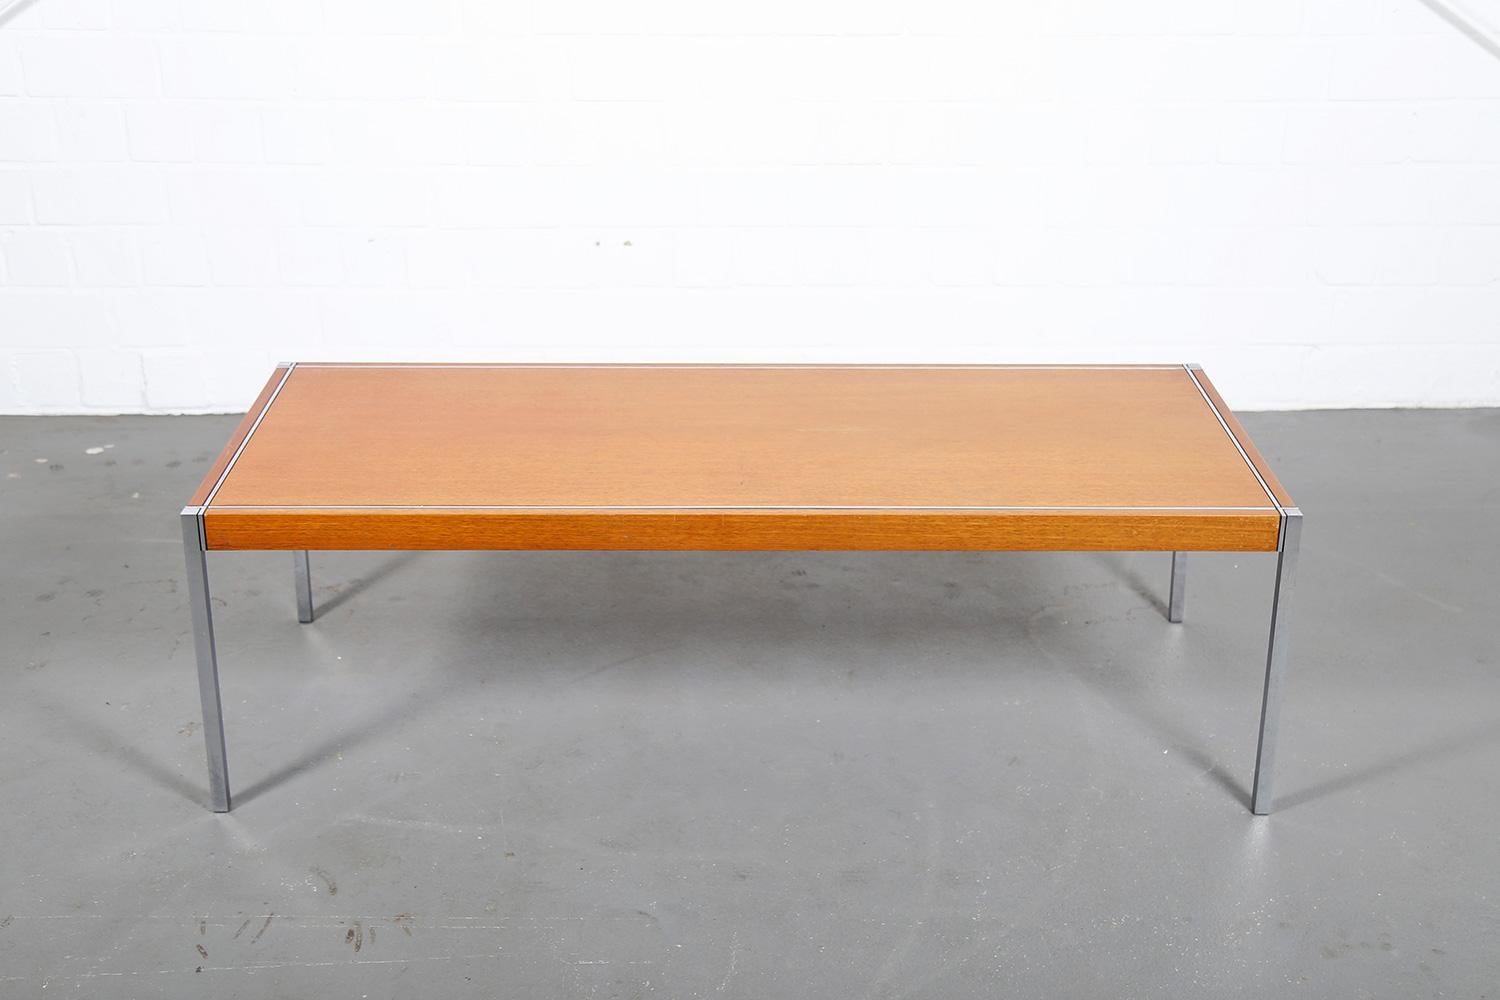 Rectangular coffee table designed by Richard Schultz for Knoll International – model “455-2” made of a teak table top and chrome legs. Hard to find! Marked on the underside with the Knoll manufacturer’s label.